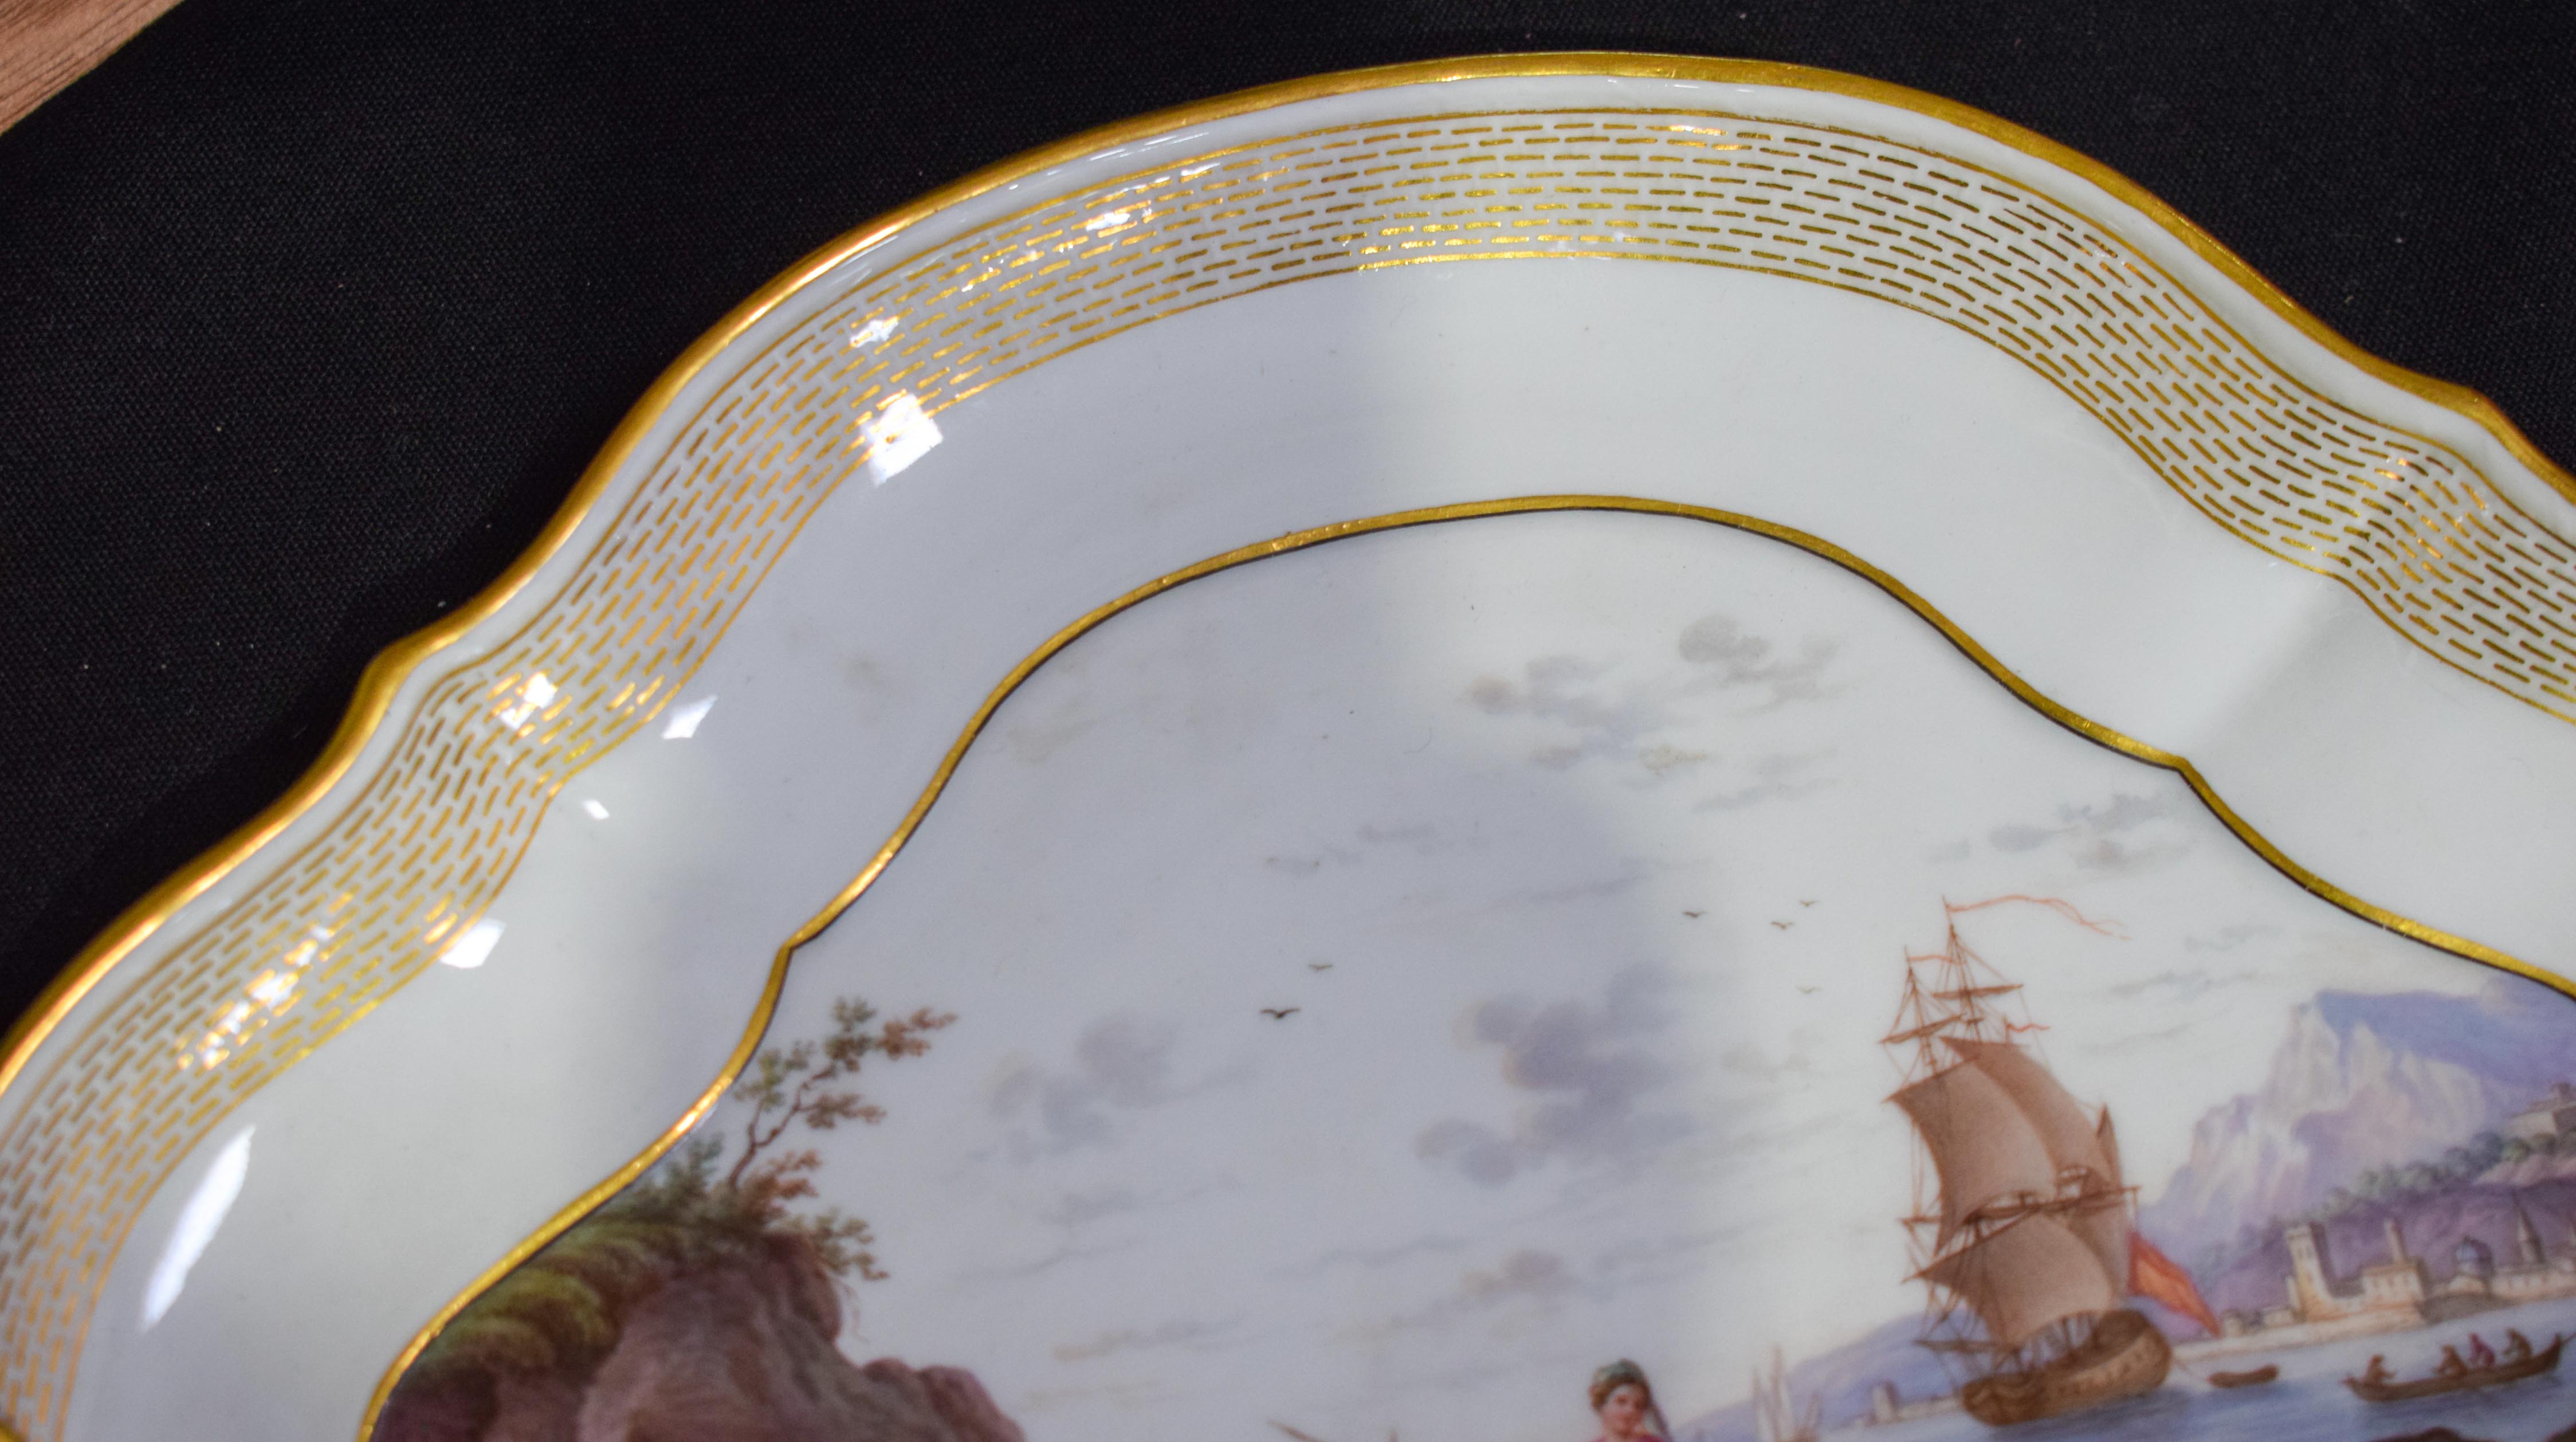 A FINE PAIR OF 18TH/19TH CENTURY MEISSEN TWIN HANDLED PORCELAIN DISHES painted with coastal views. 2 - Image 17 of 19